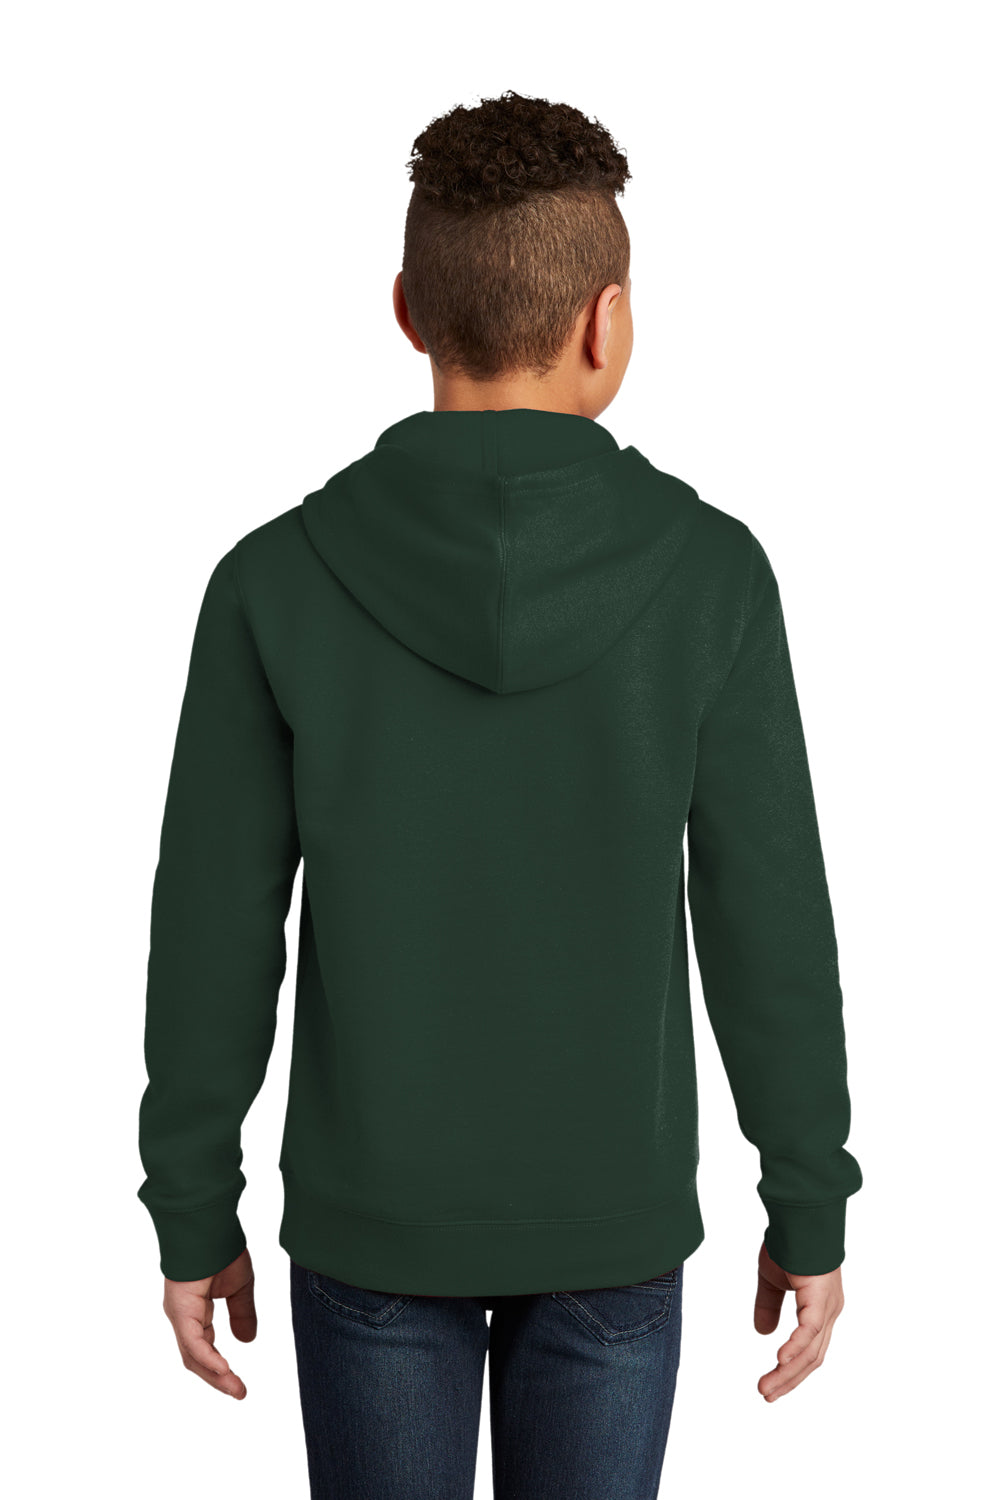 District Youth Very Important Fleece Hooded Sweatshirt Hoodie Forest Green Side